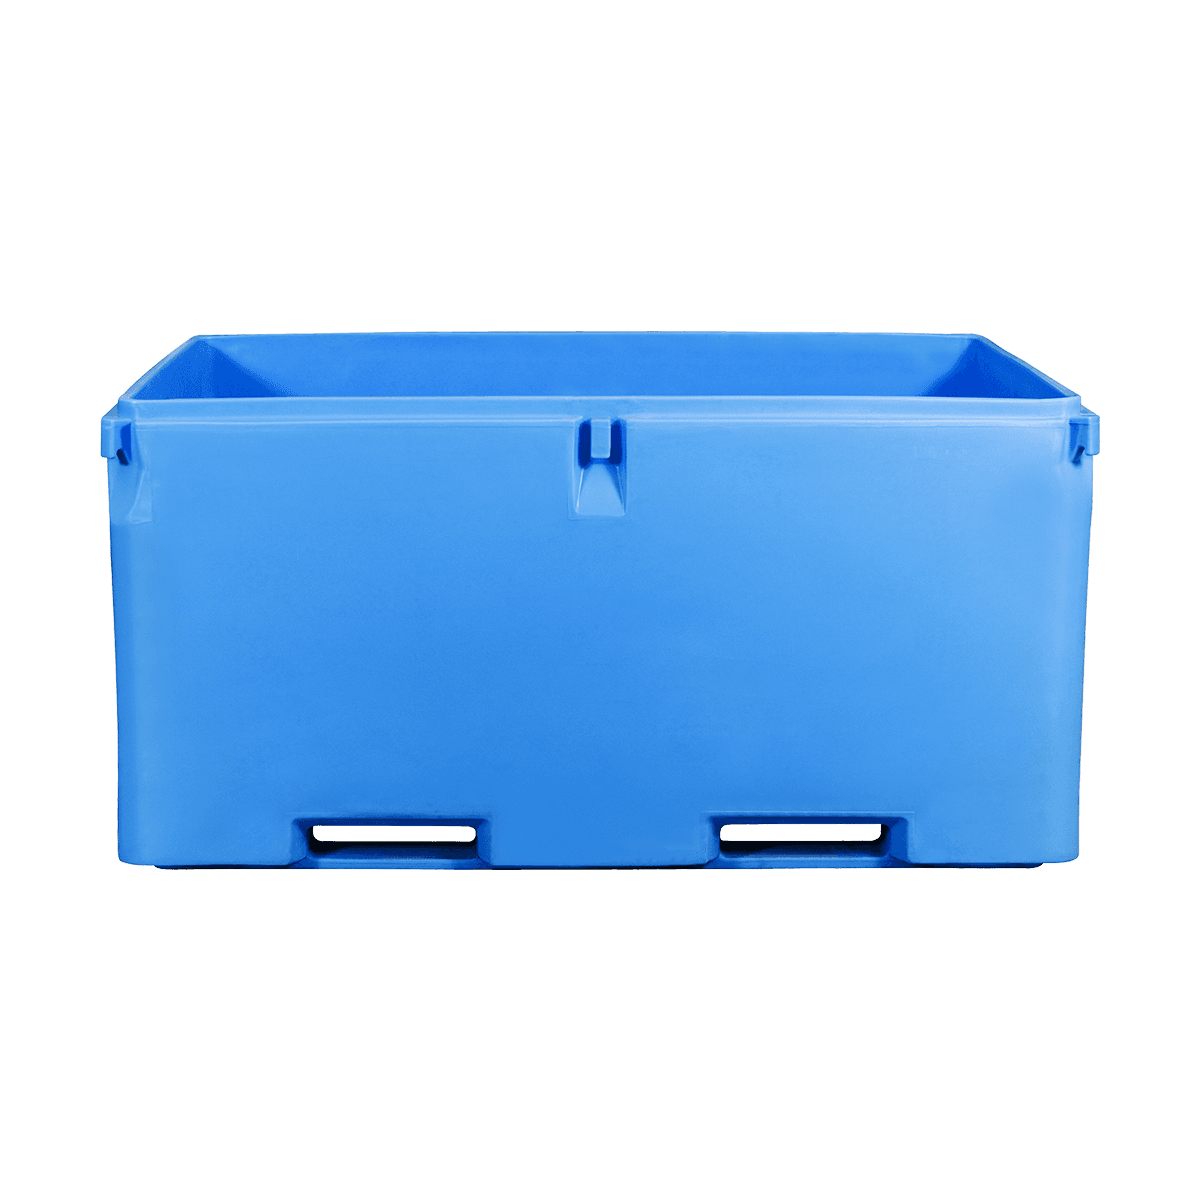 AF-1700L Large Tuna Fish Long Distance Live Fish Transportation and Storage Containers